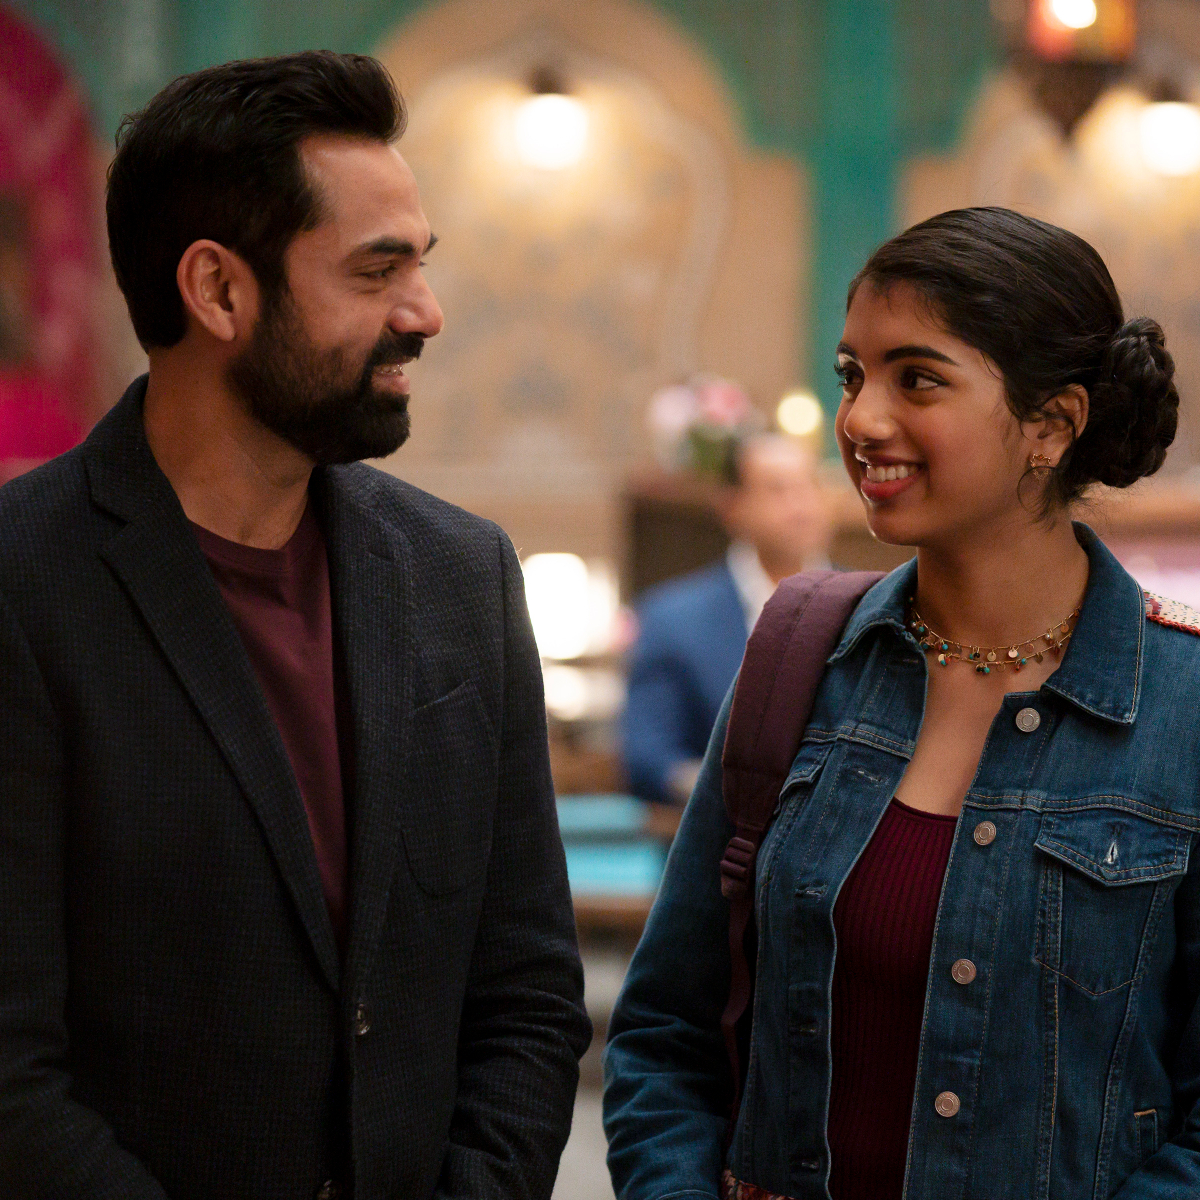 EXCLUSIVE: Spin's Abhay Deol shares his shooting experience for Disney film in Toronto amid COVID-19 protocols